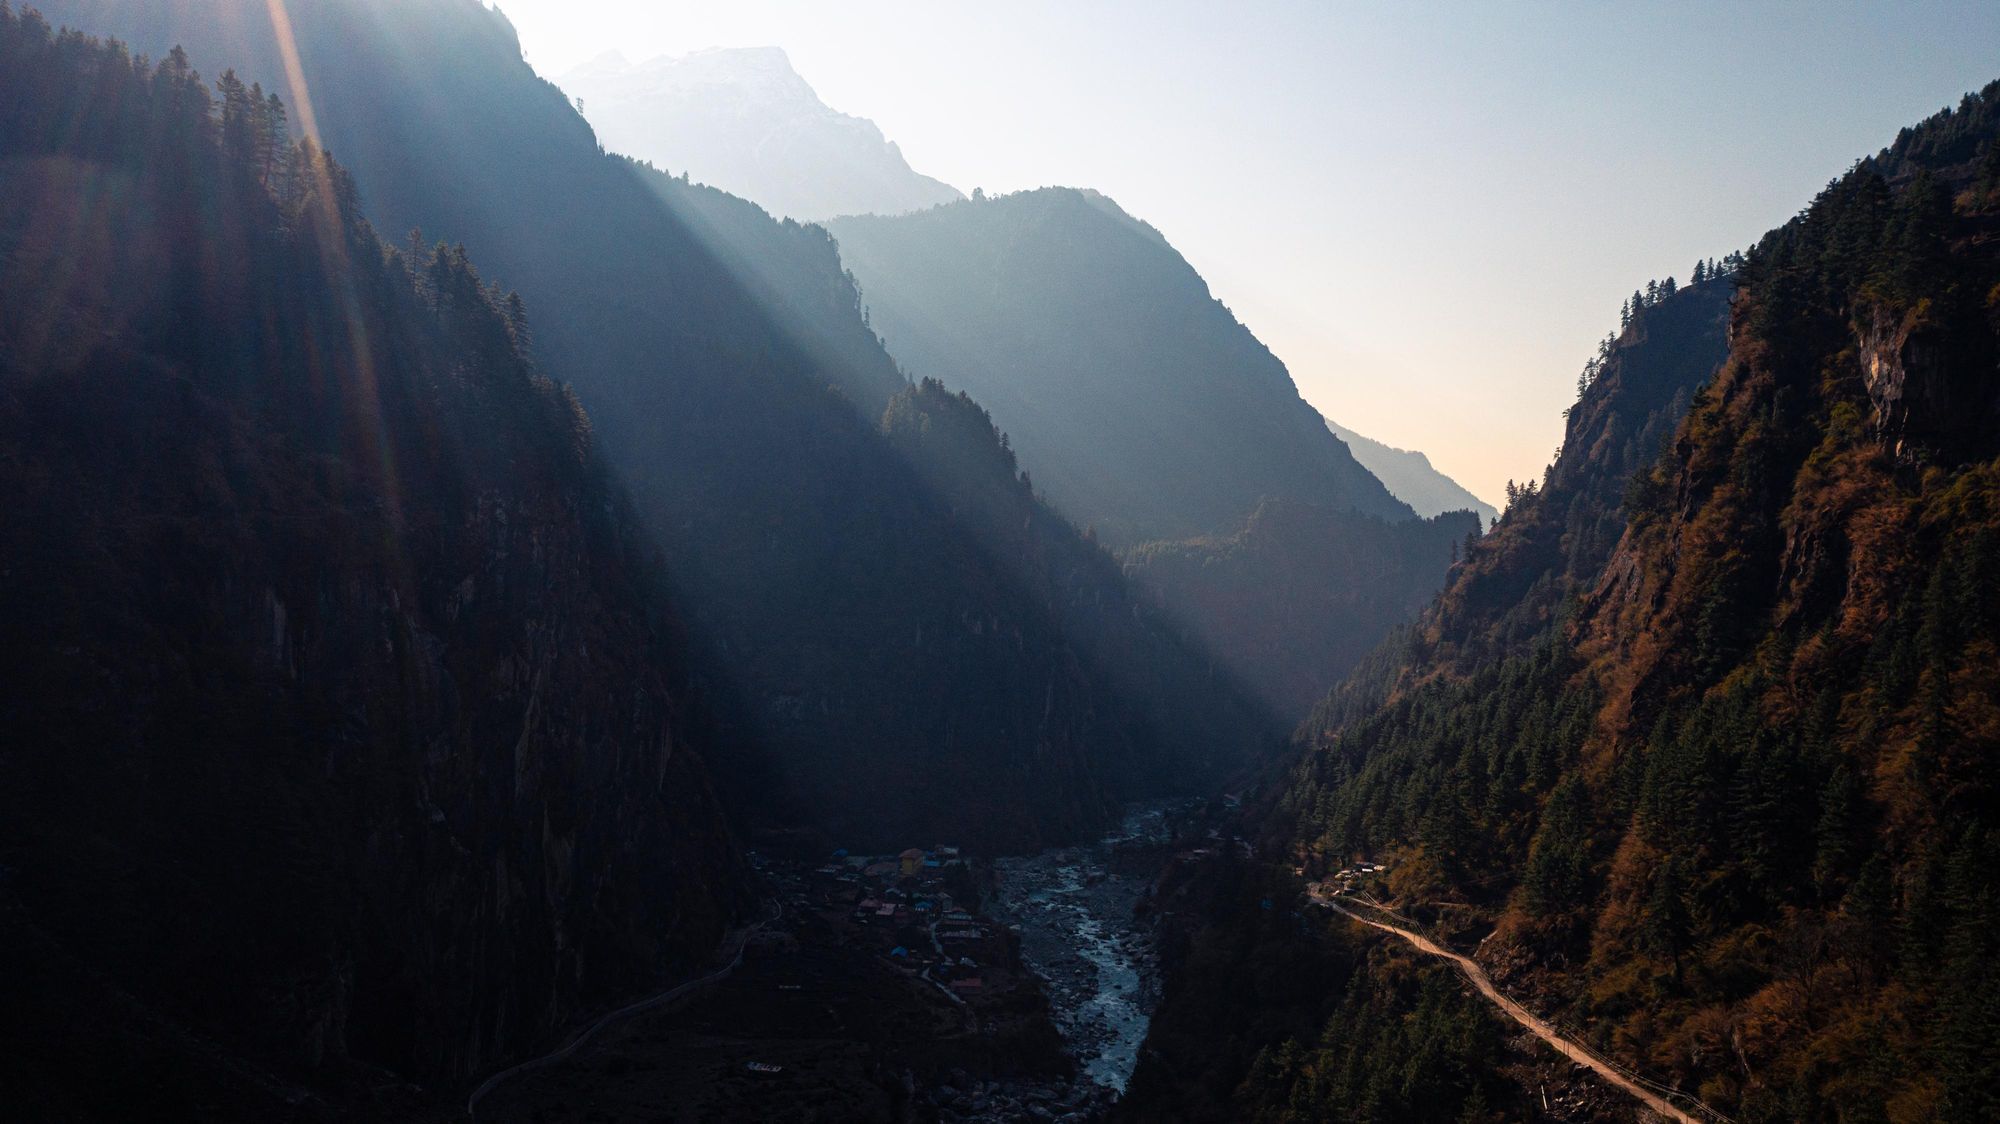 The Annapurna Circuit route is one of huge variety, from valleys and gorges to high mountain passes. Photo: Josh Edwards